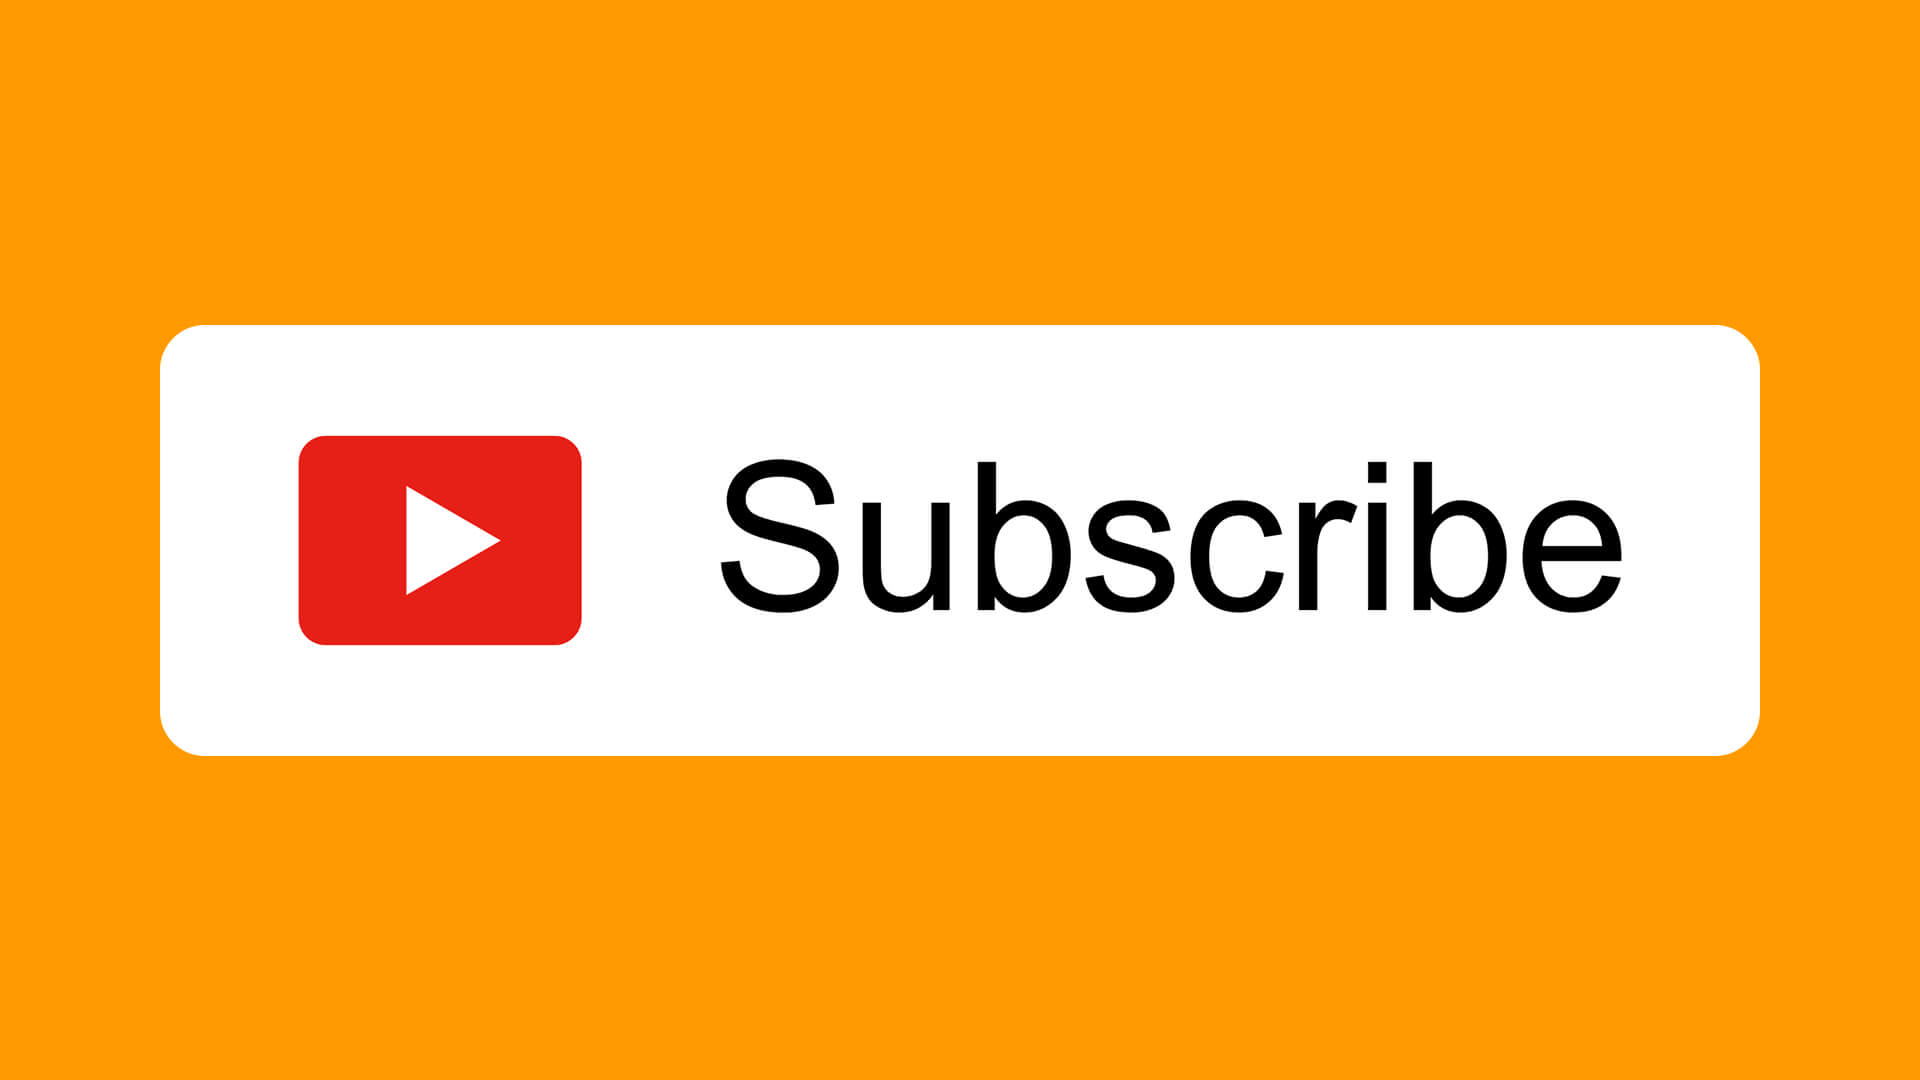 Free-YouTube-Subscribe-Button-Download-Design-Inspiration-By-AlfredoCreates-10